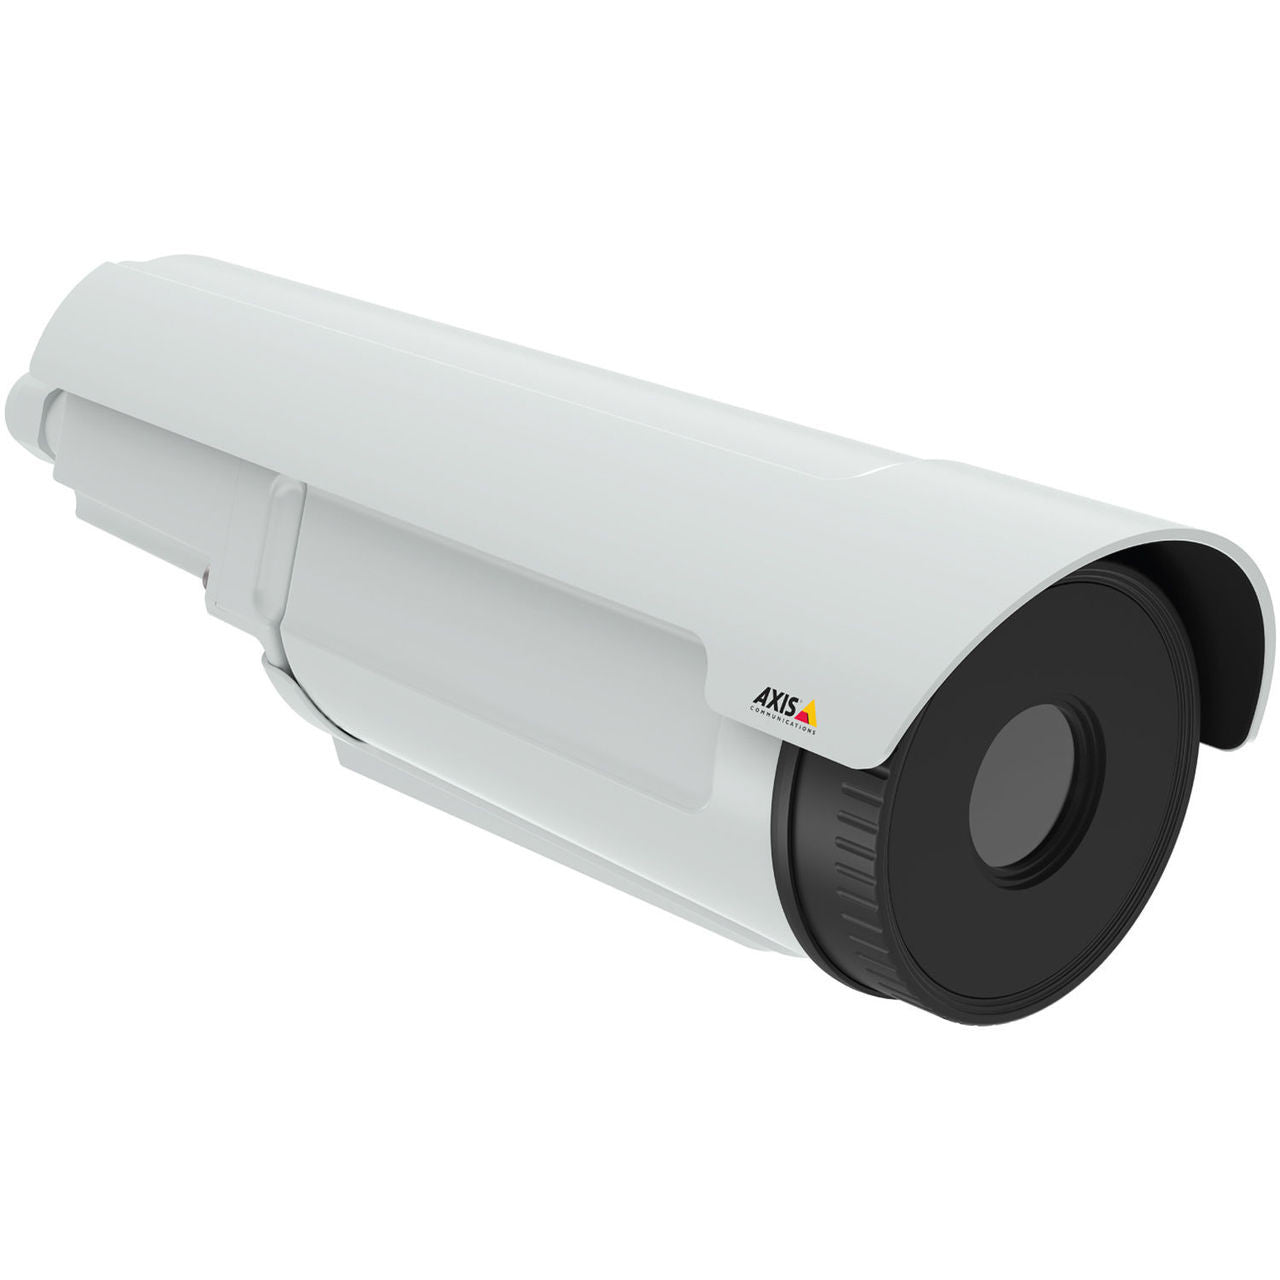 AXIS Q1942-E PT Mount (0981-001) 10mm 30fps Thermal Network Camera